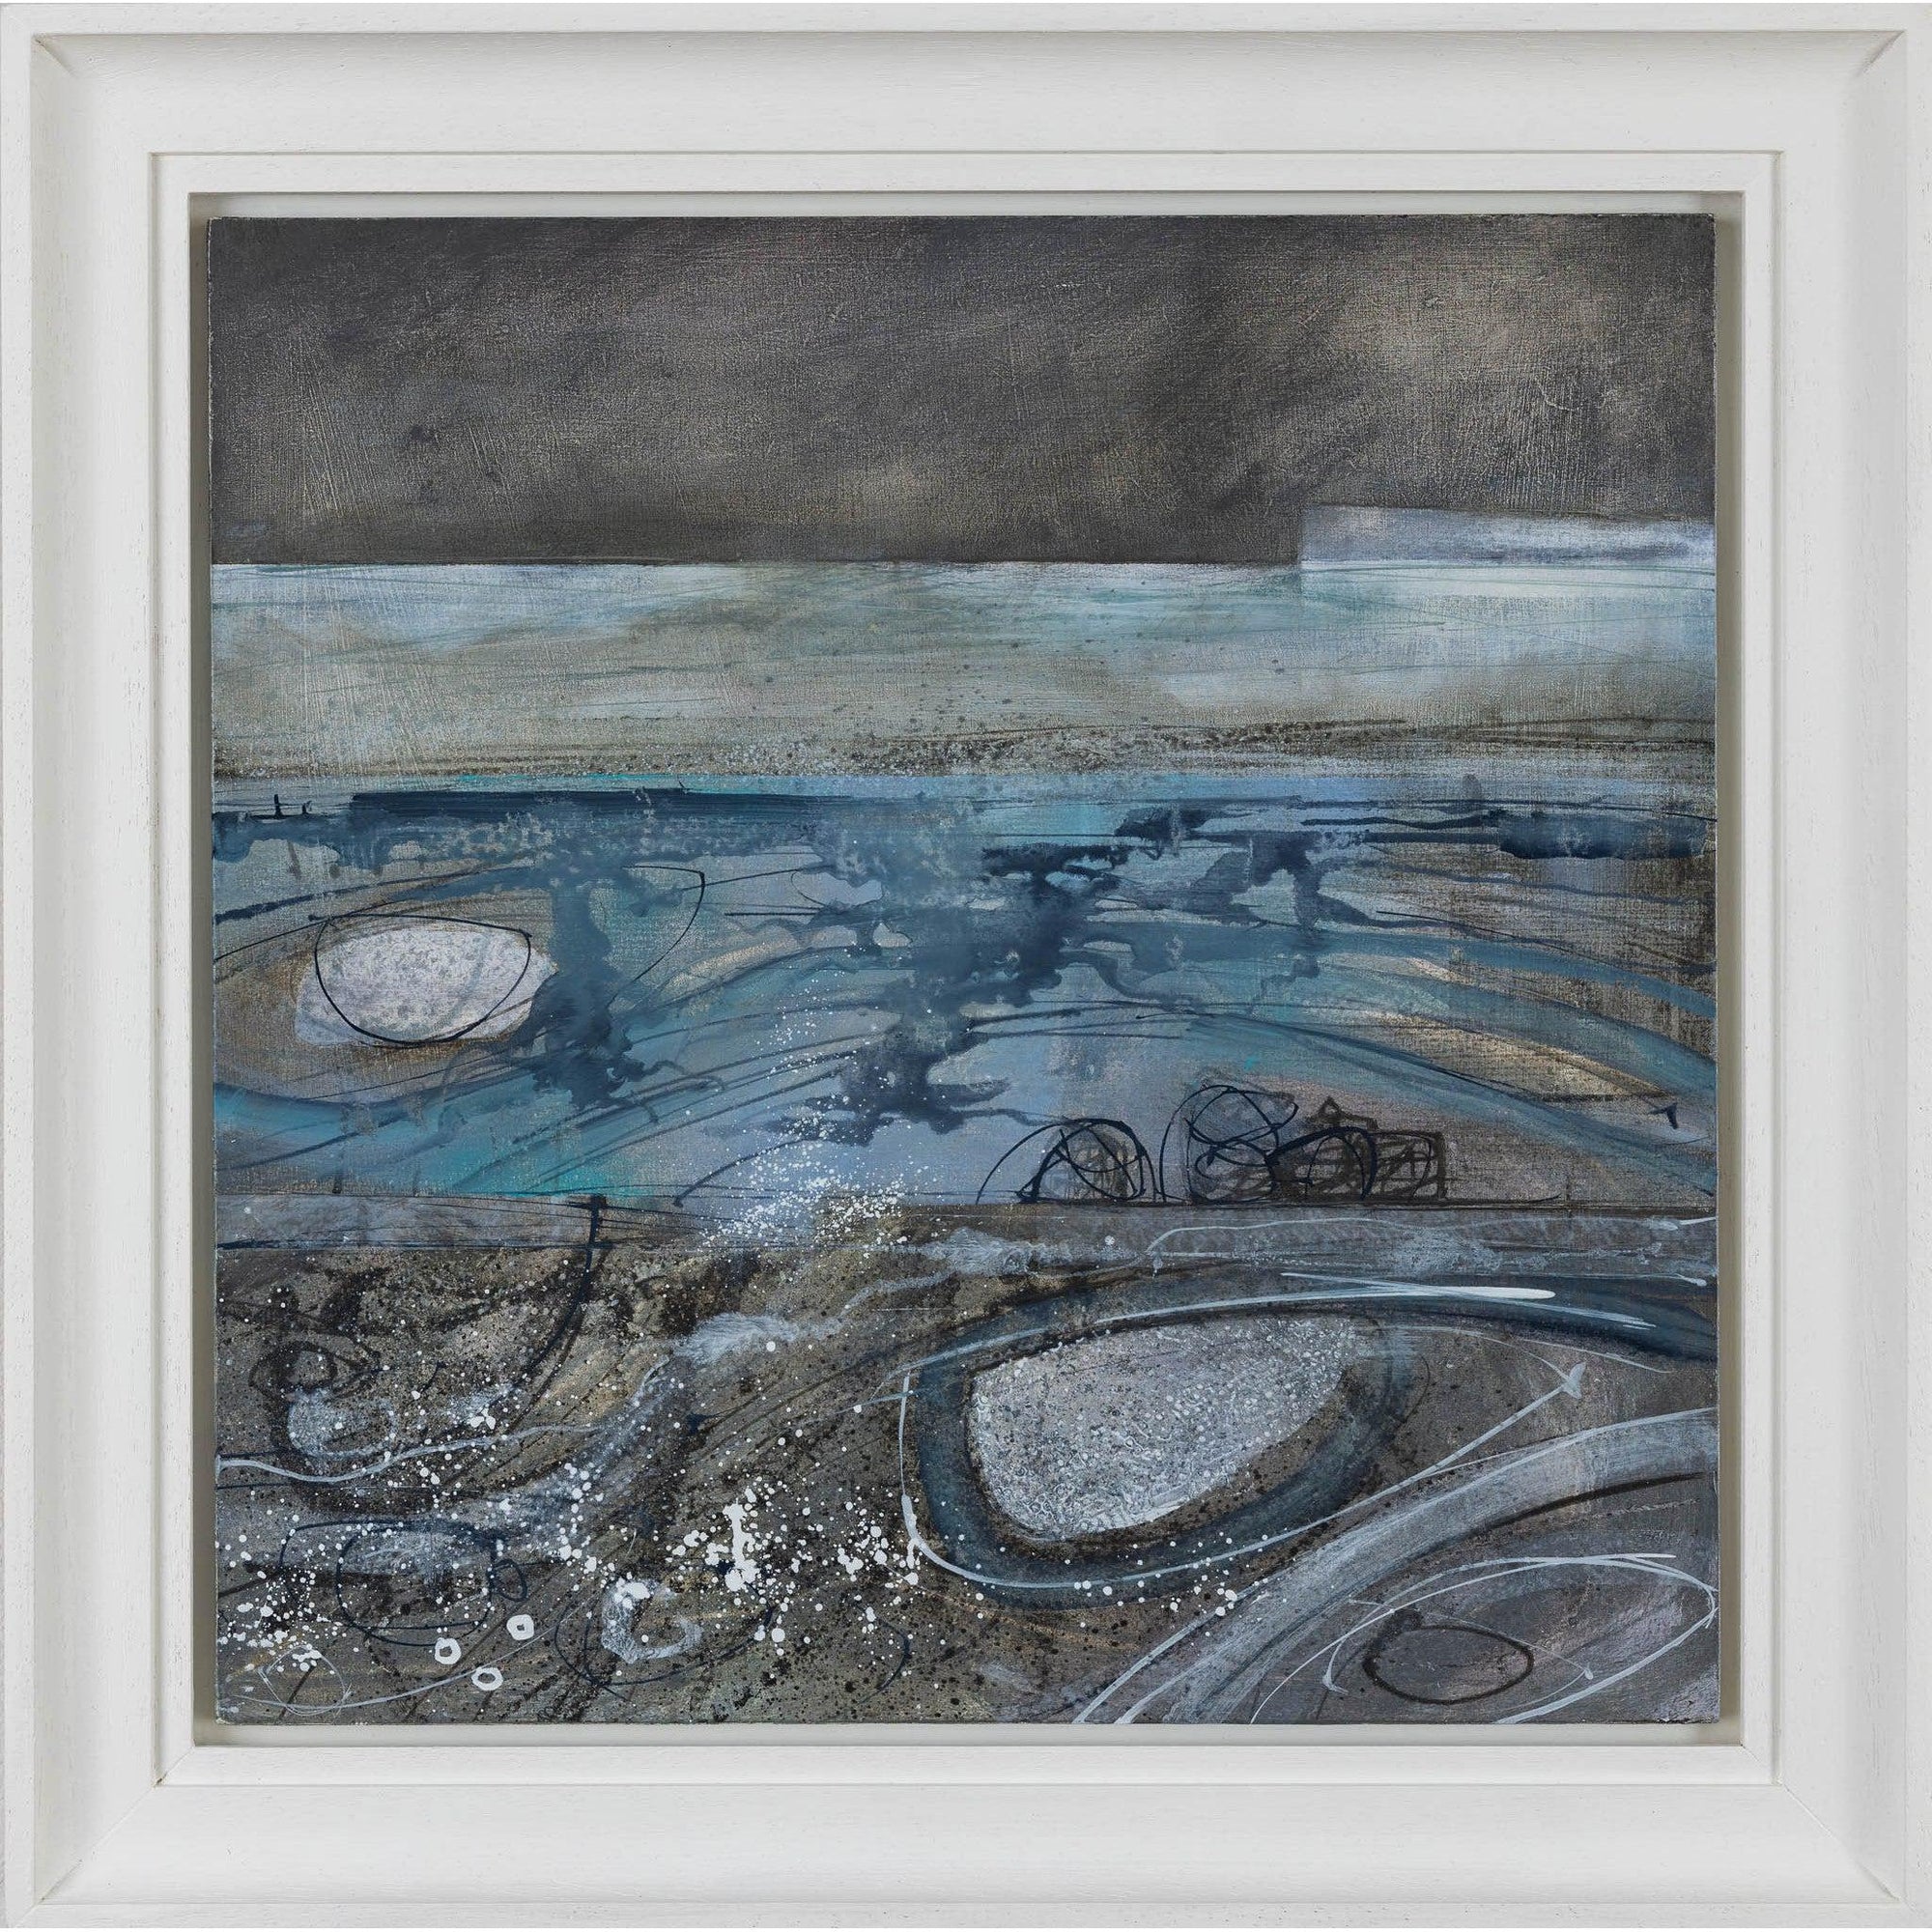 ‘On a dark beach' oil on board by Ruth Taylor, available at Padstow Gallery, Cornwall